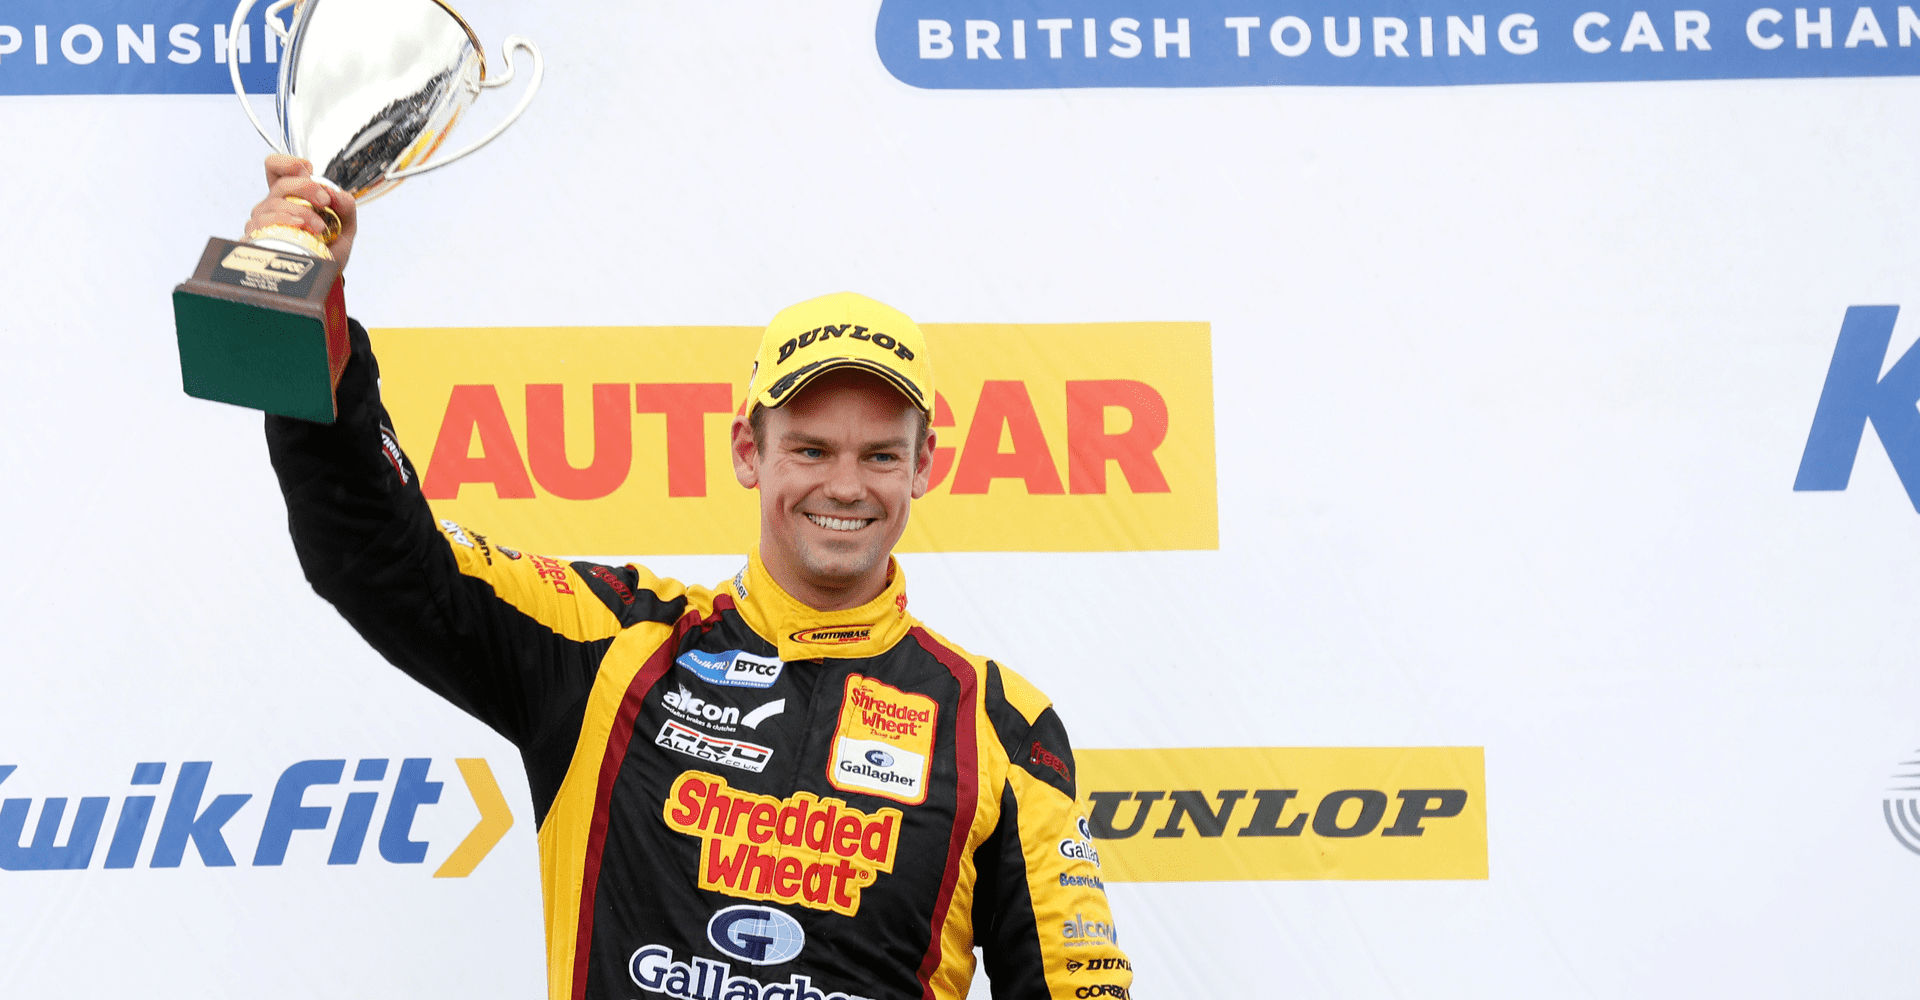 Team Shredded Wheat Racing with Gallagher signs off in style with podium and double Indy win at Brands Hatch